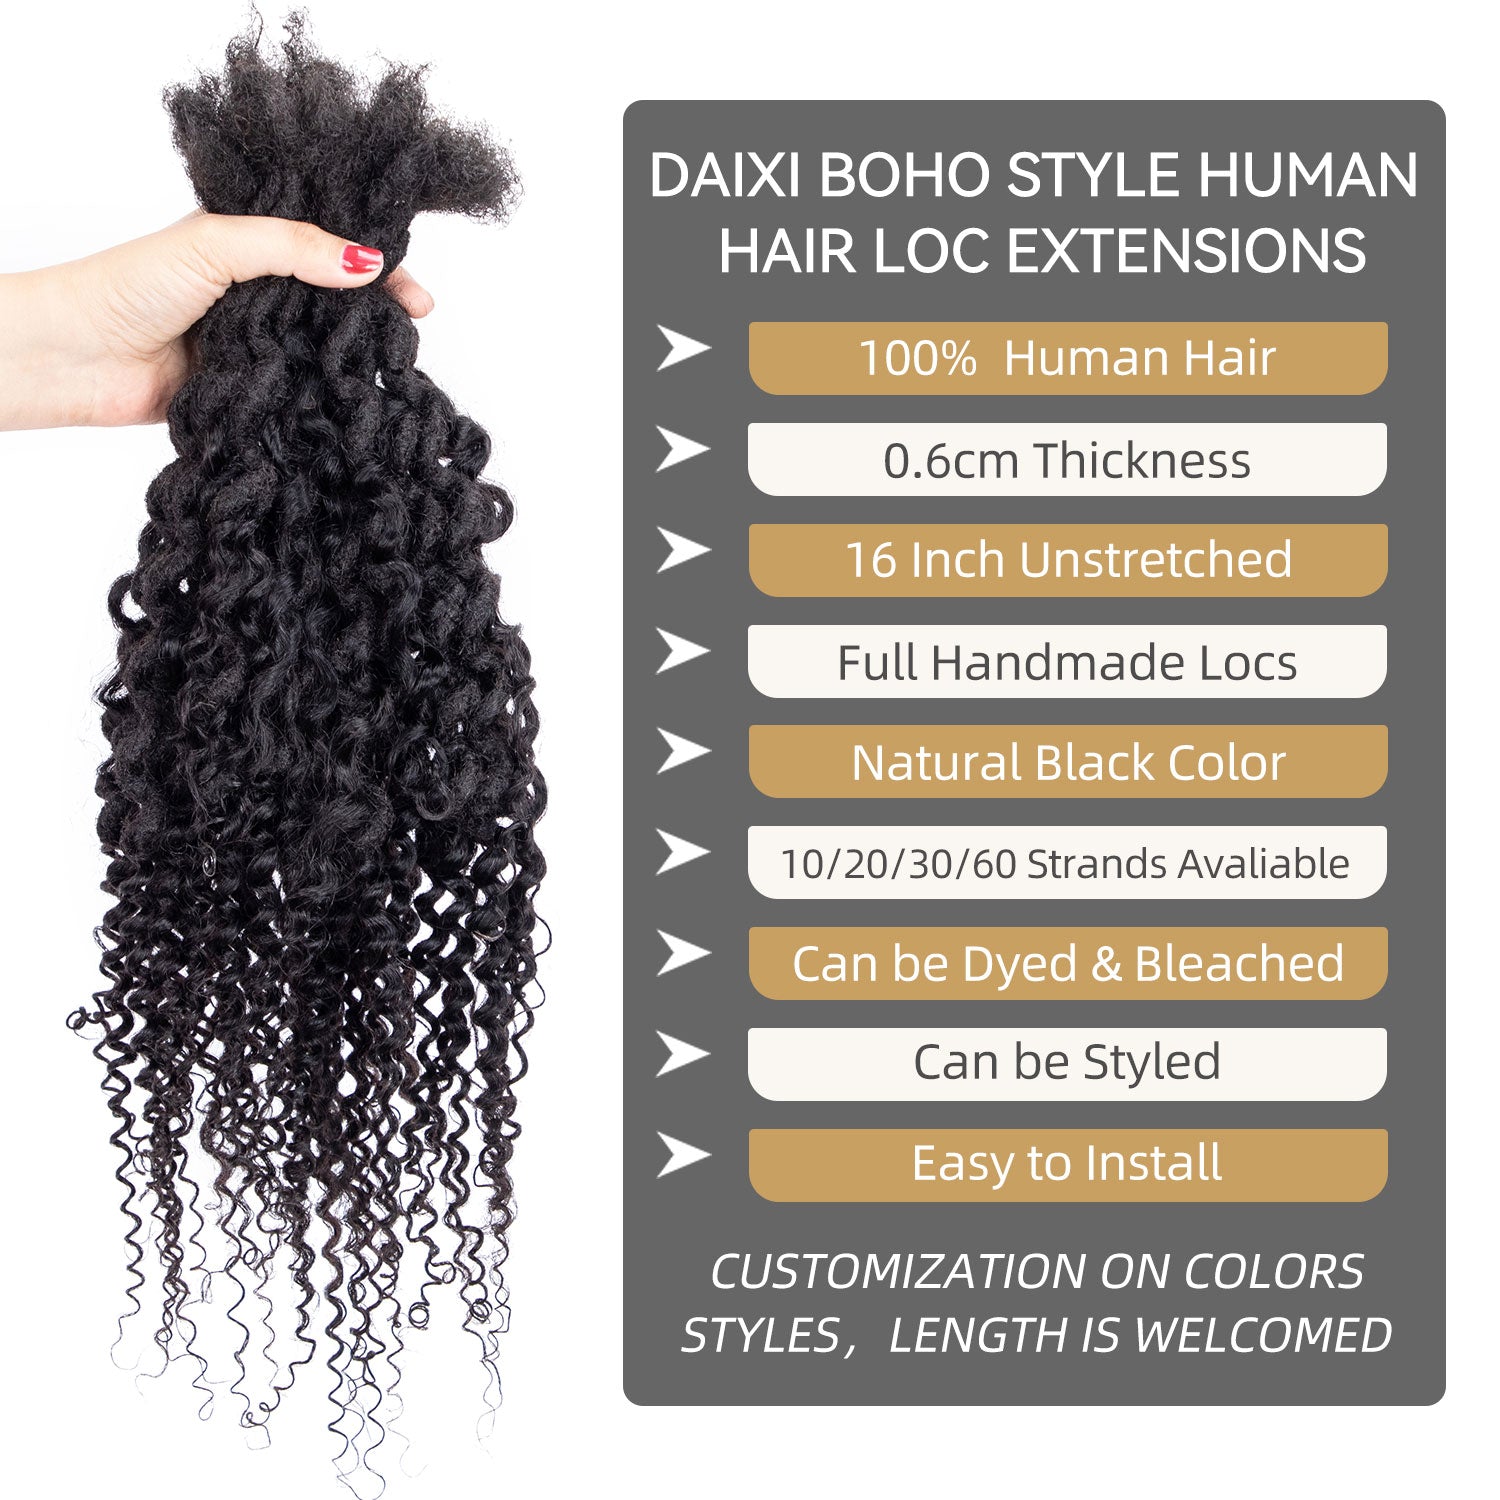 Boho Dreadlocks Extensions with Curly Ends Afro Human Hair Handmade Goddess Locs 0.6cm Thickness Natural Black